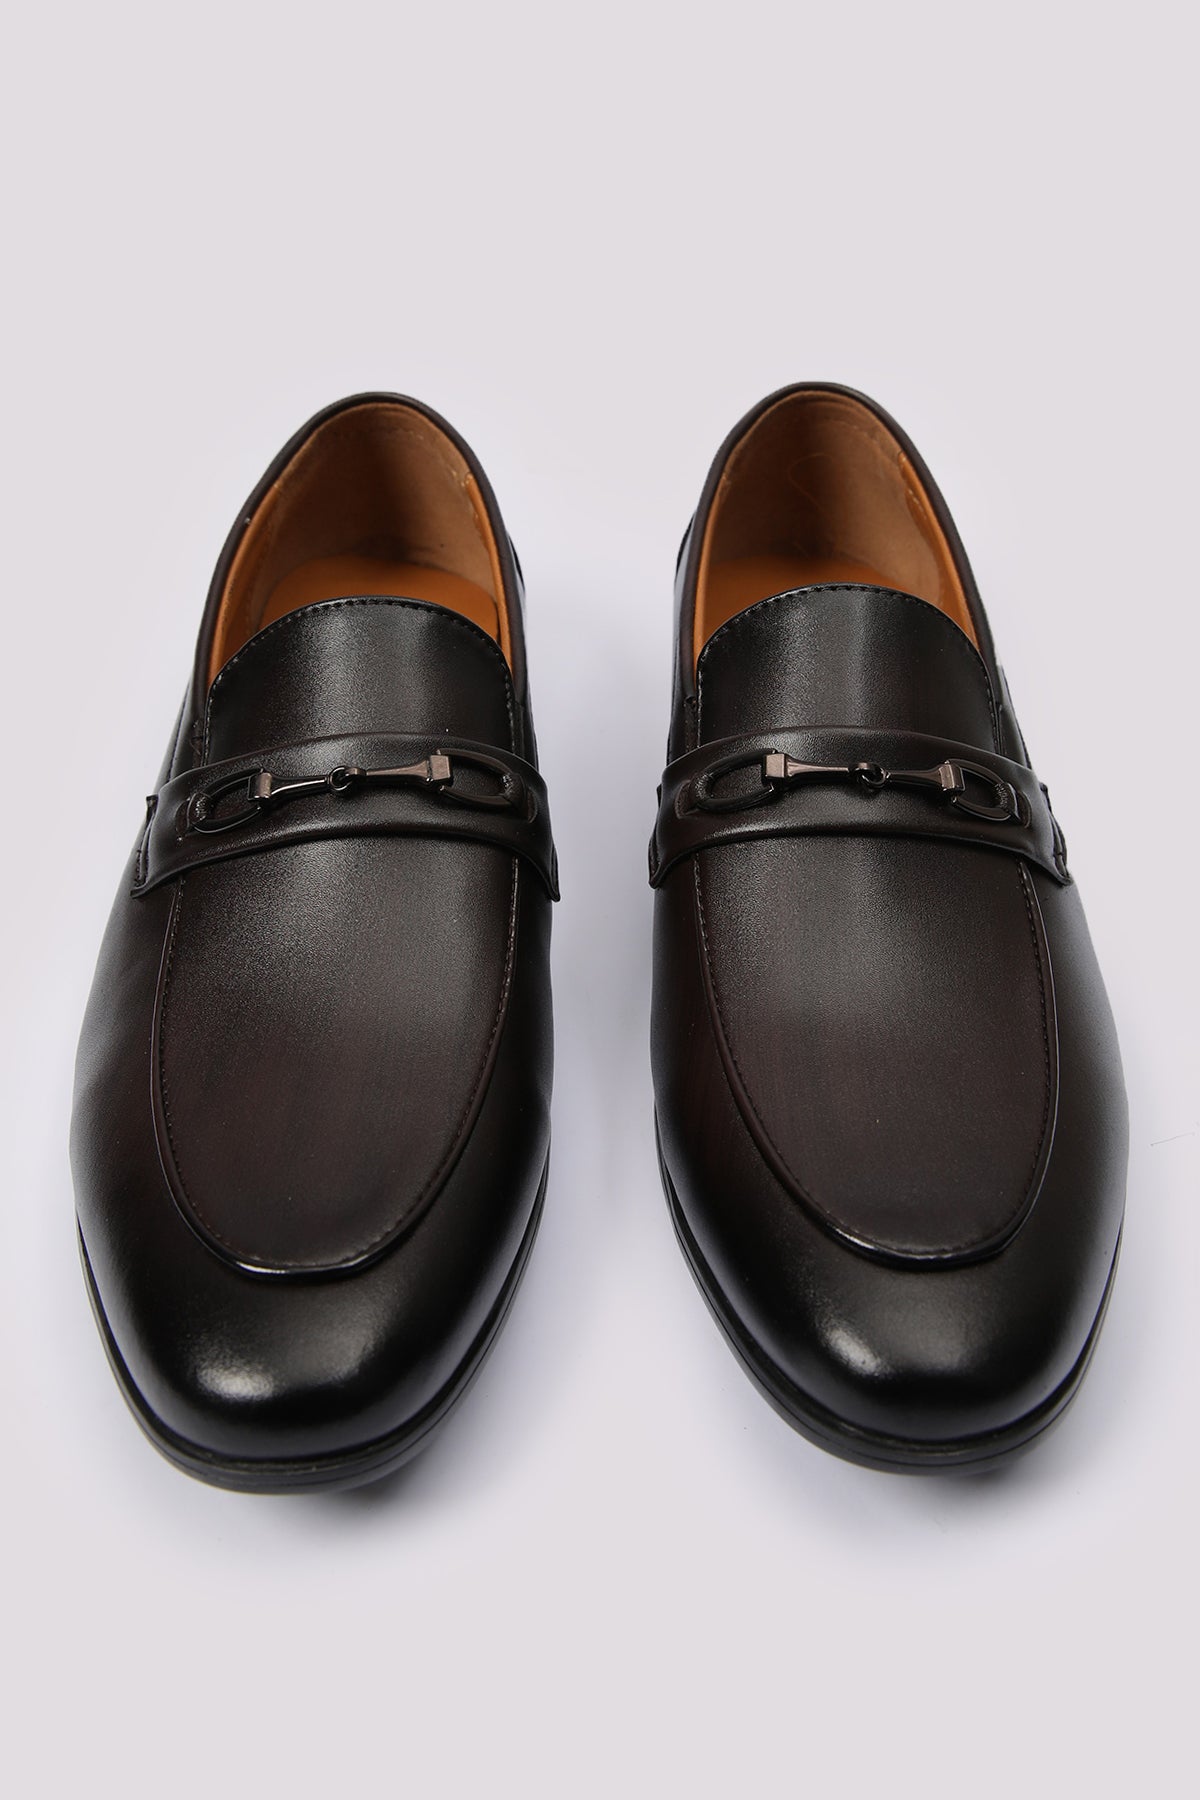 COFFEE SOFT LEATHER SHOES